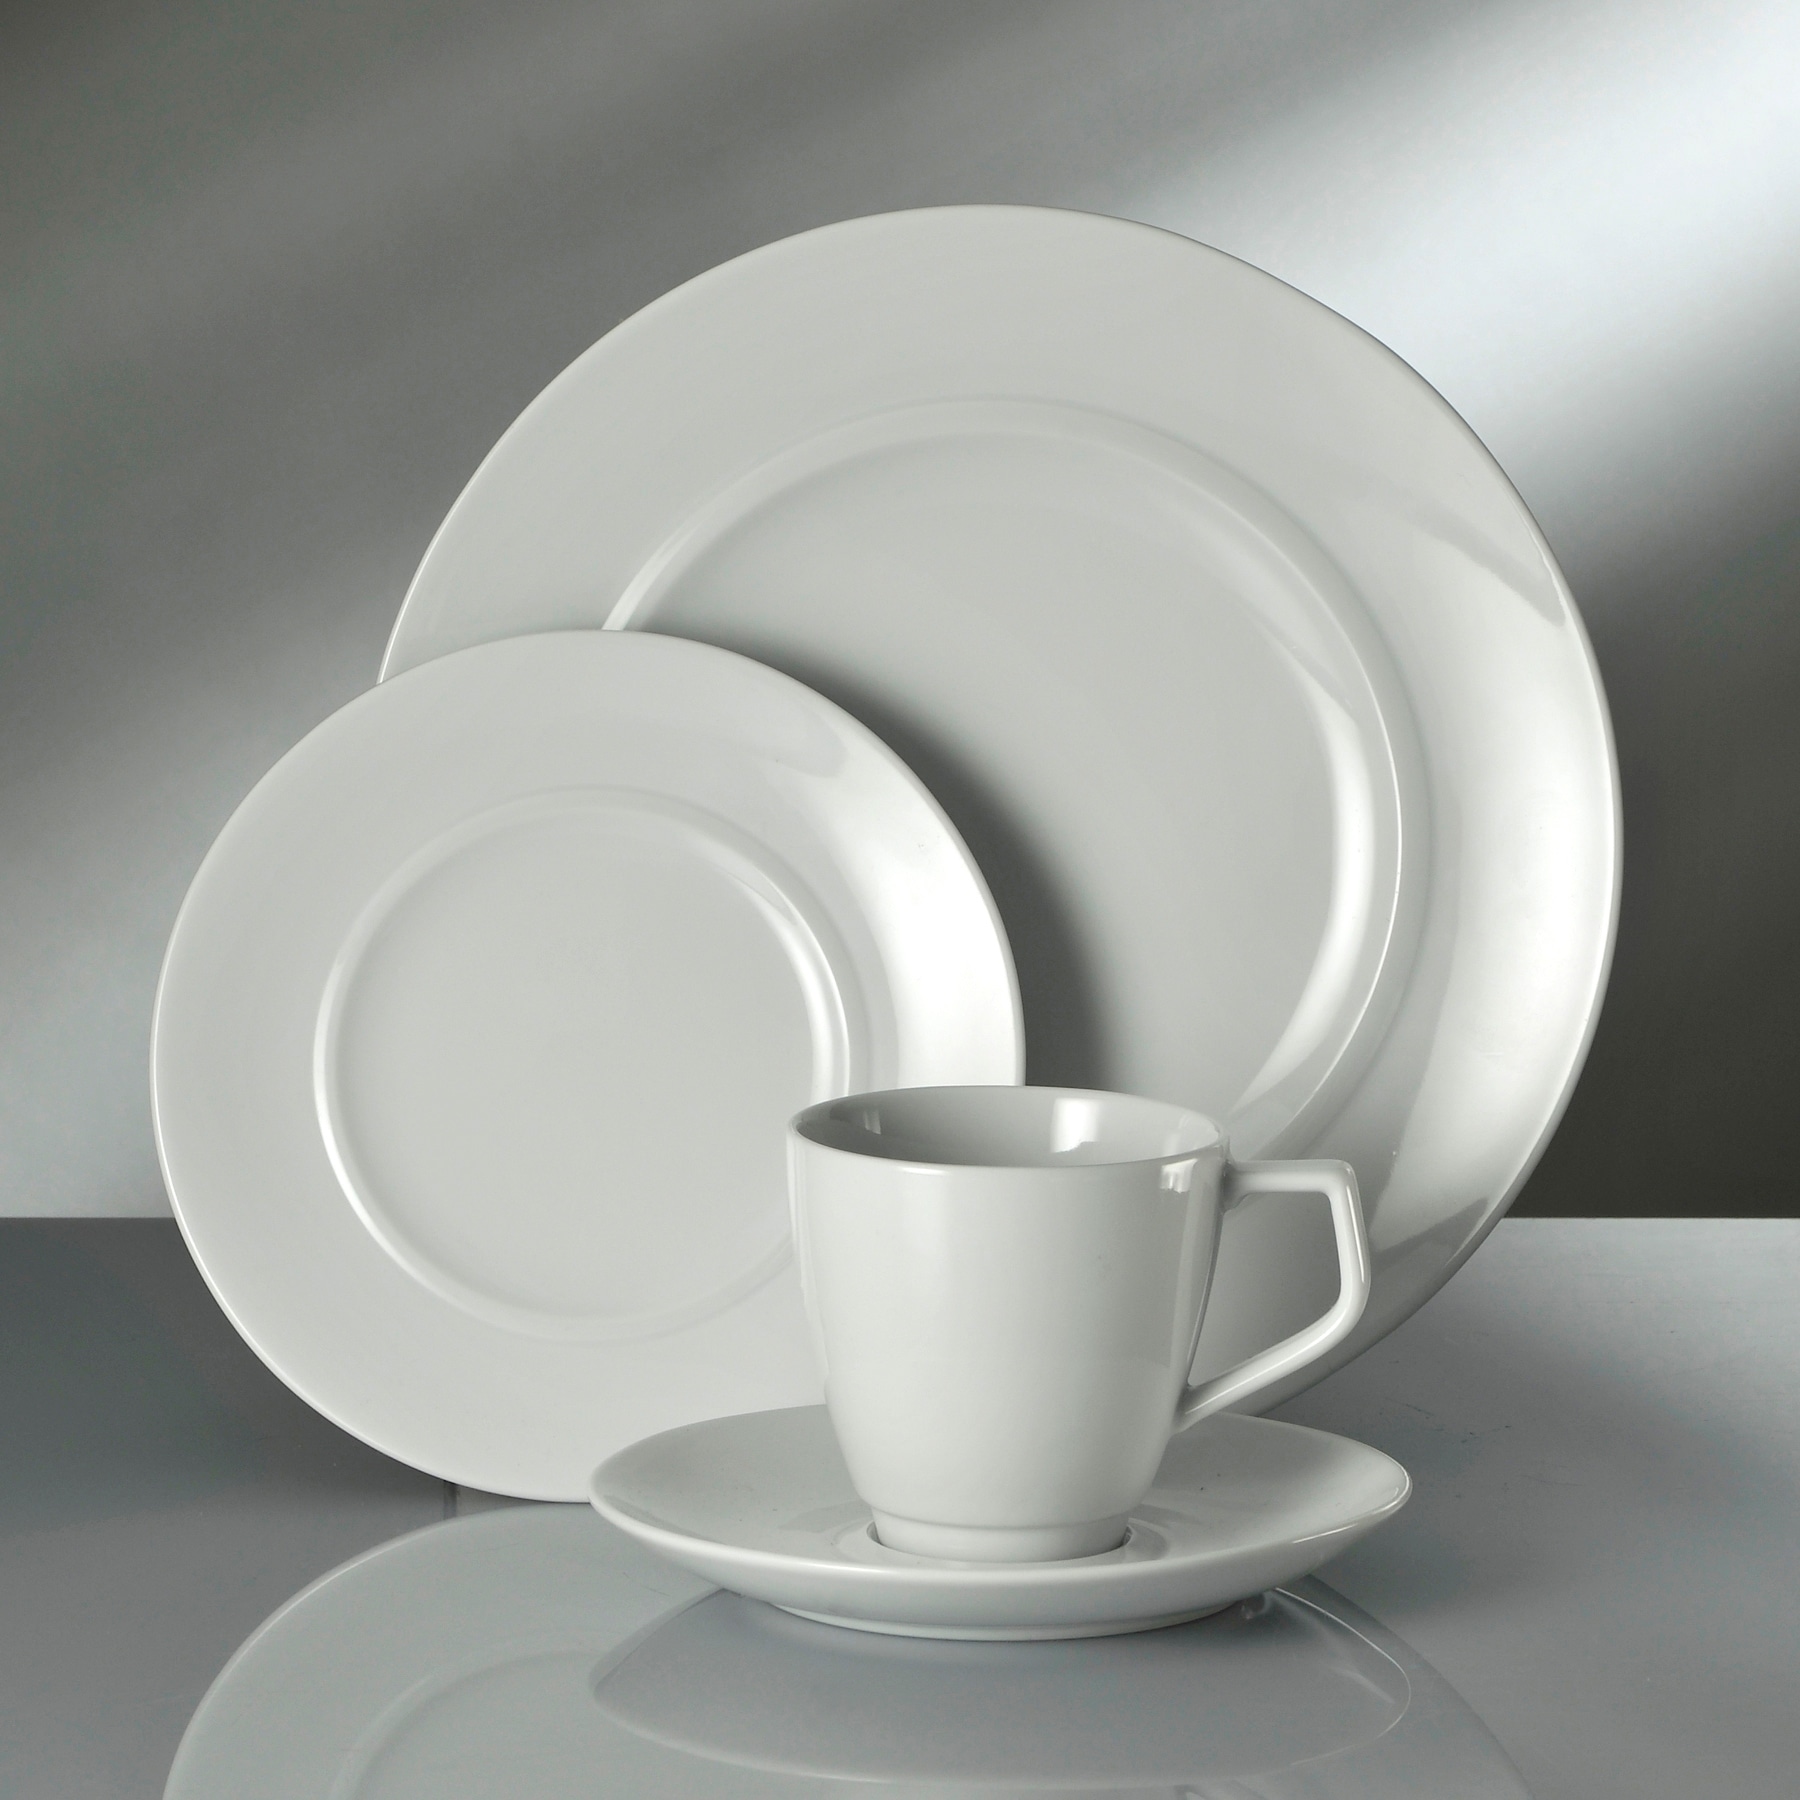 https://ak1.ostkcdn.com/images/products/is/images/direct/3bd706451eb9ea330f34eabb3cf5160a4db5acdd/Sant%27-Andrea-Circa-Porcelain-Espresso-Saucers-%28Set-of-36%29-by-Oneida.jpg